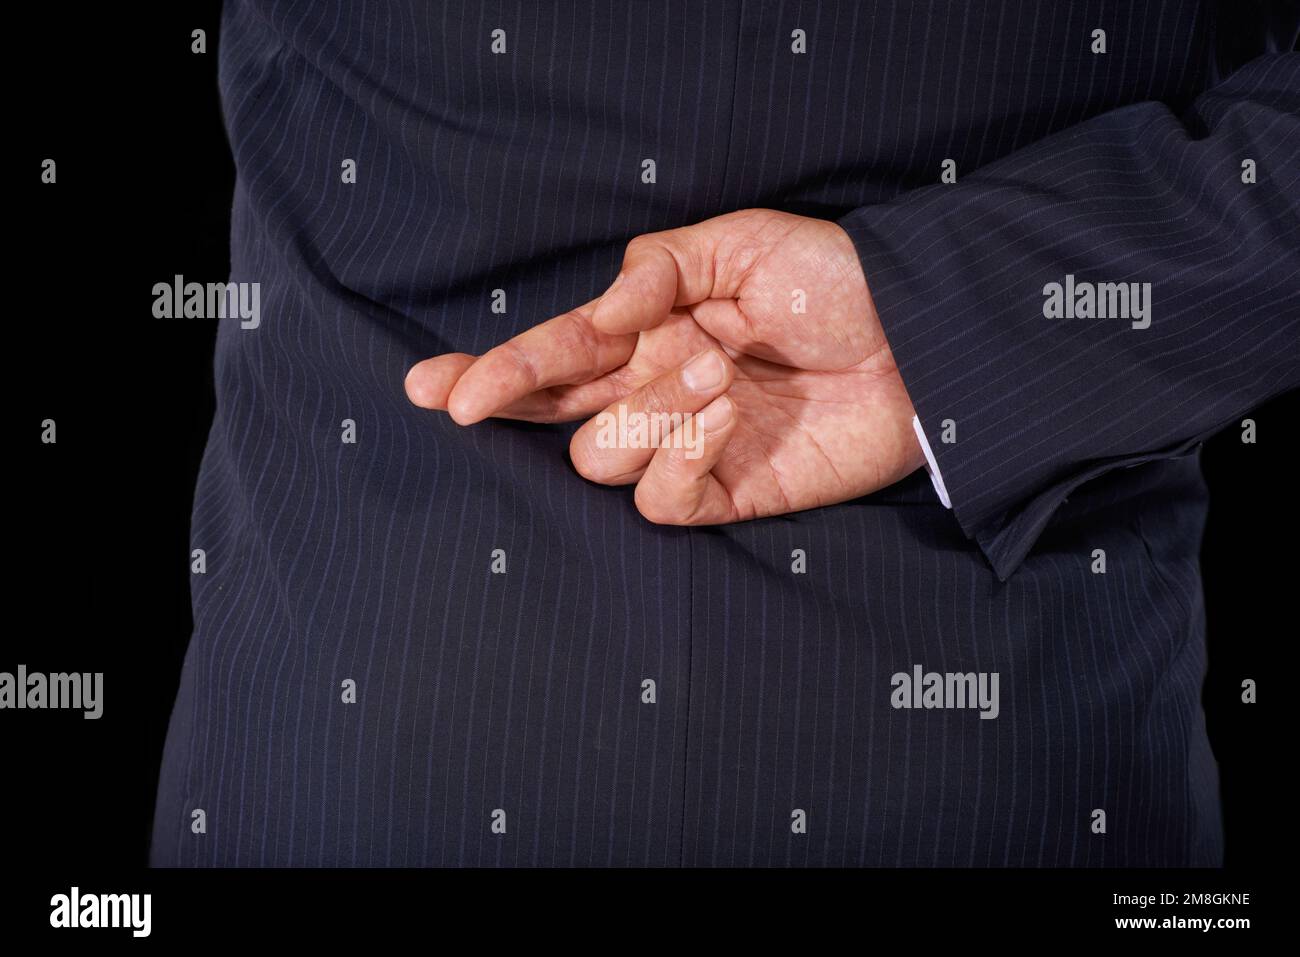 Telling lies. Cropped view of a man in a suit wth his fingers crossed behind his back. Stock Photo